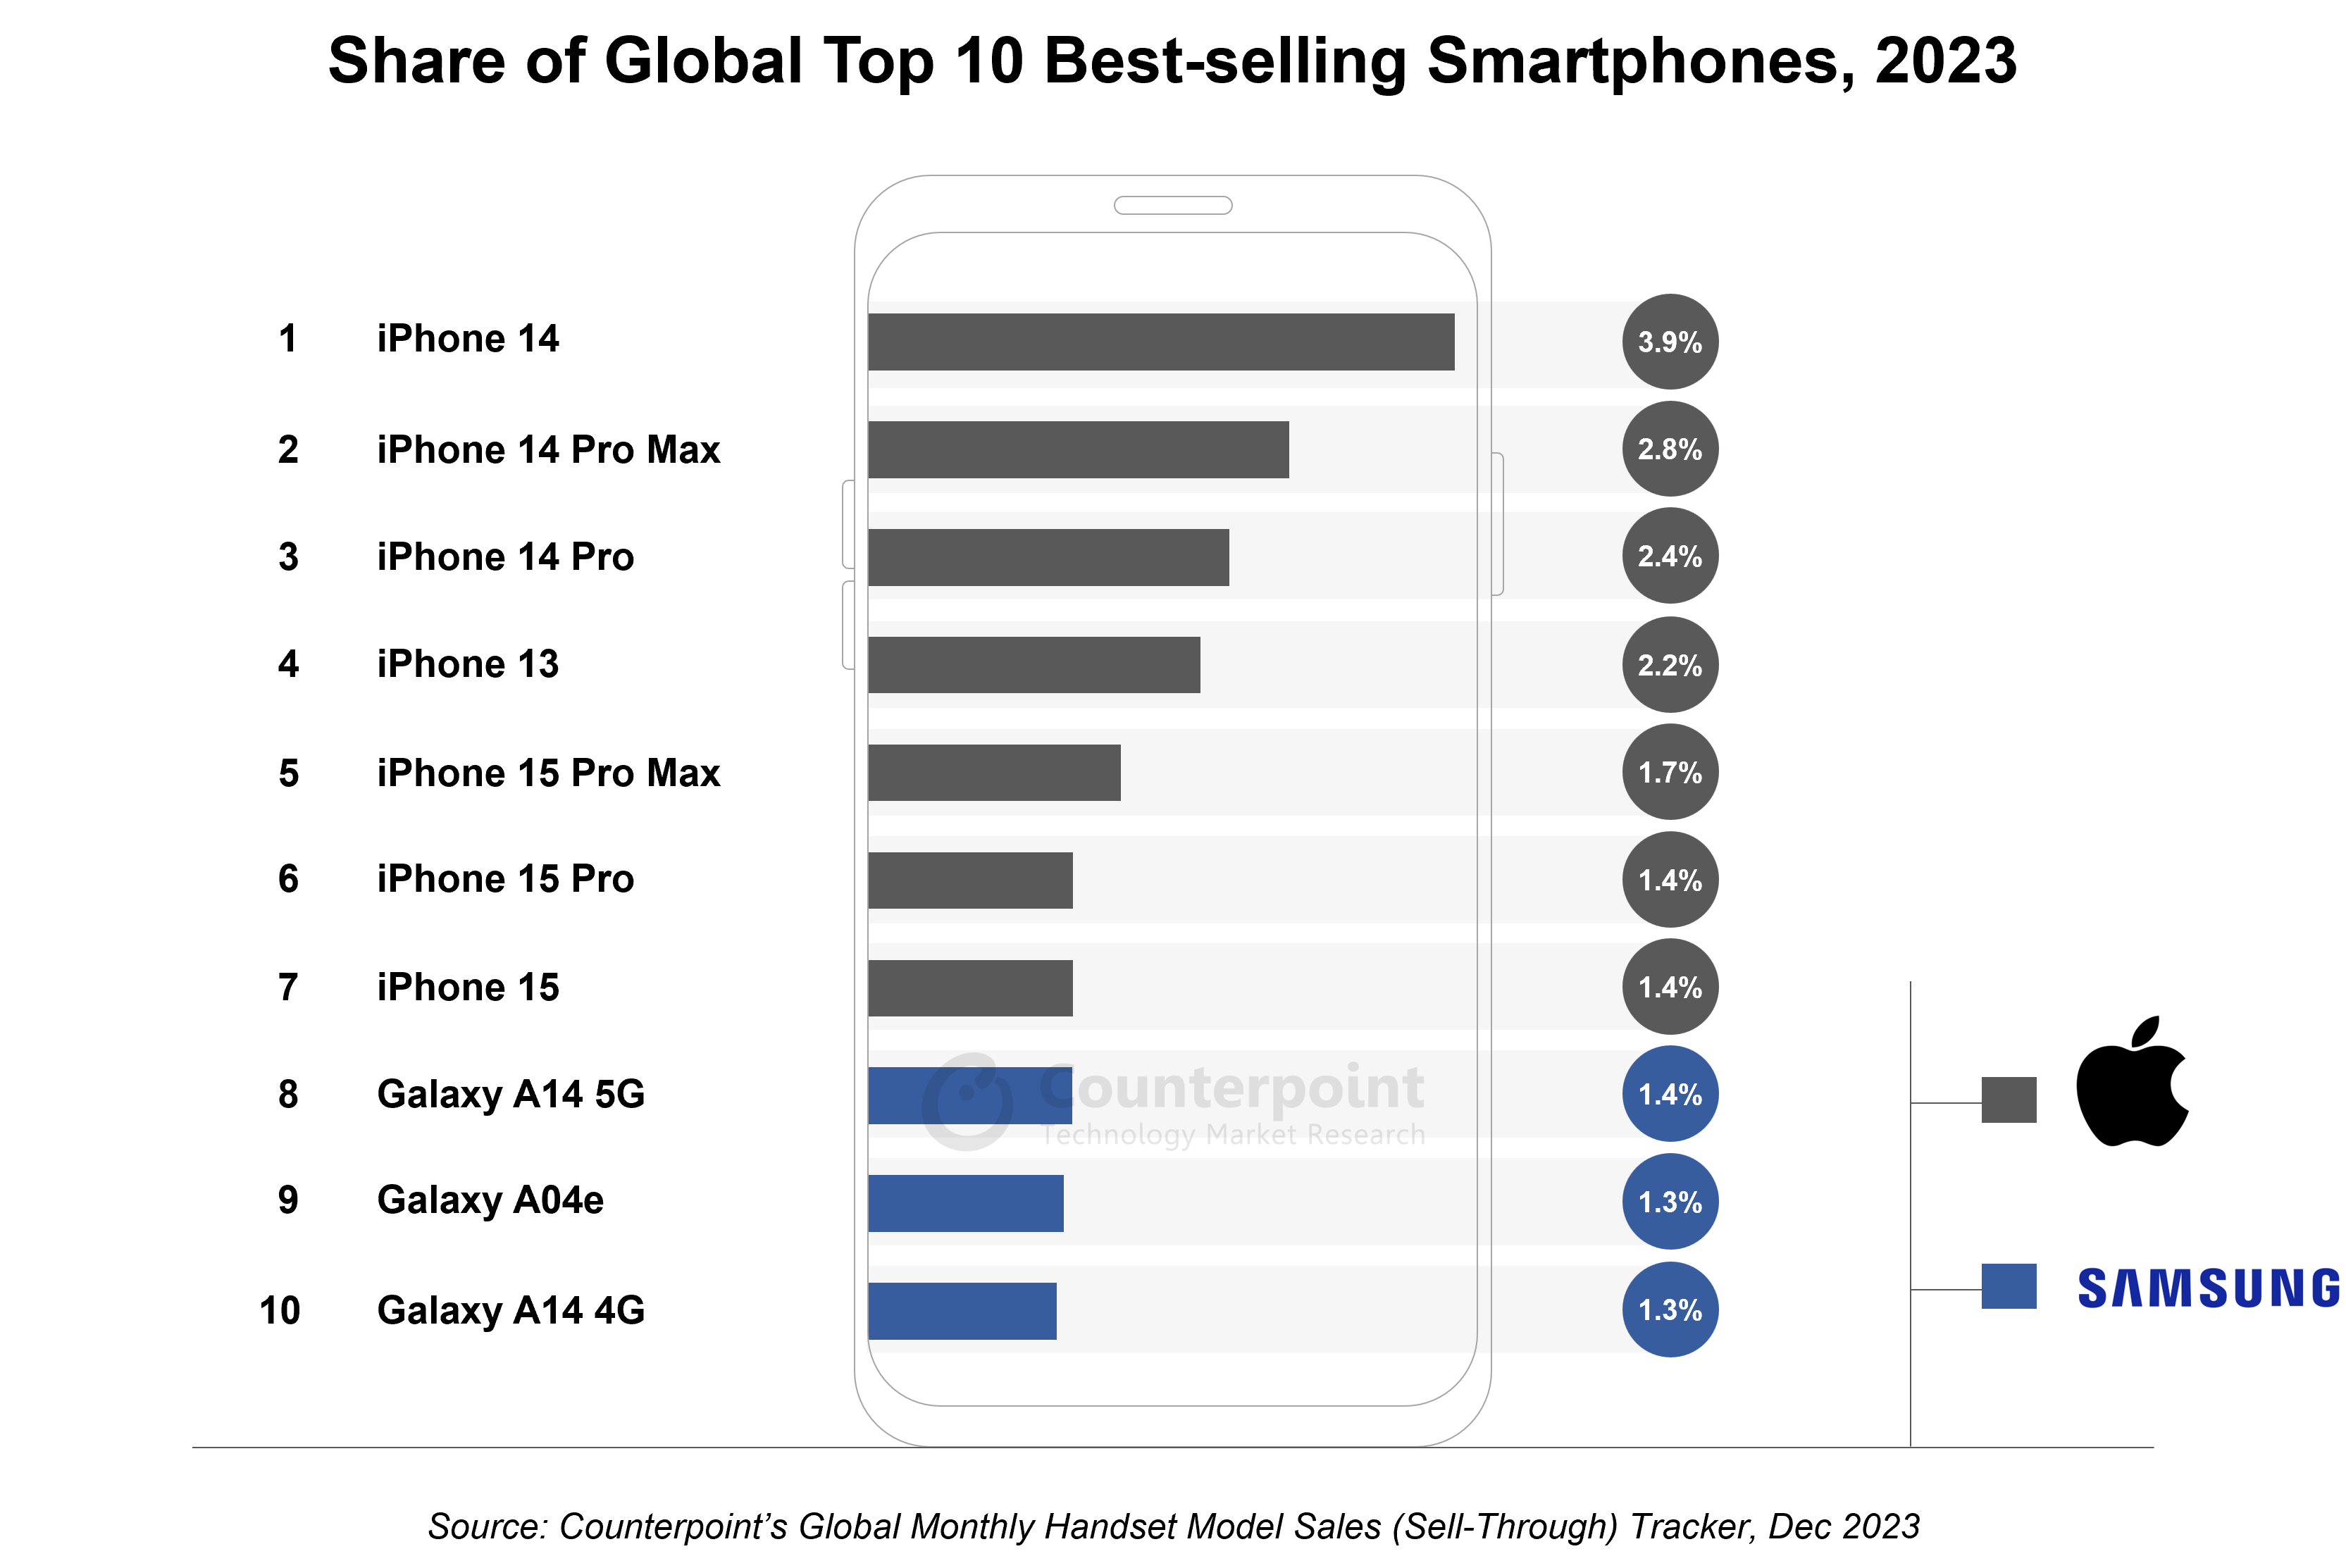 A chart showing Share of Global Top 10 Best-selling Smartphones, 2023